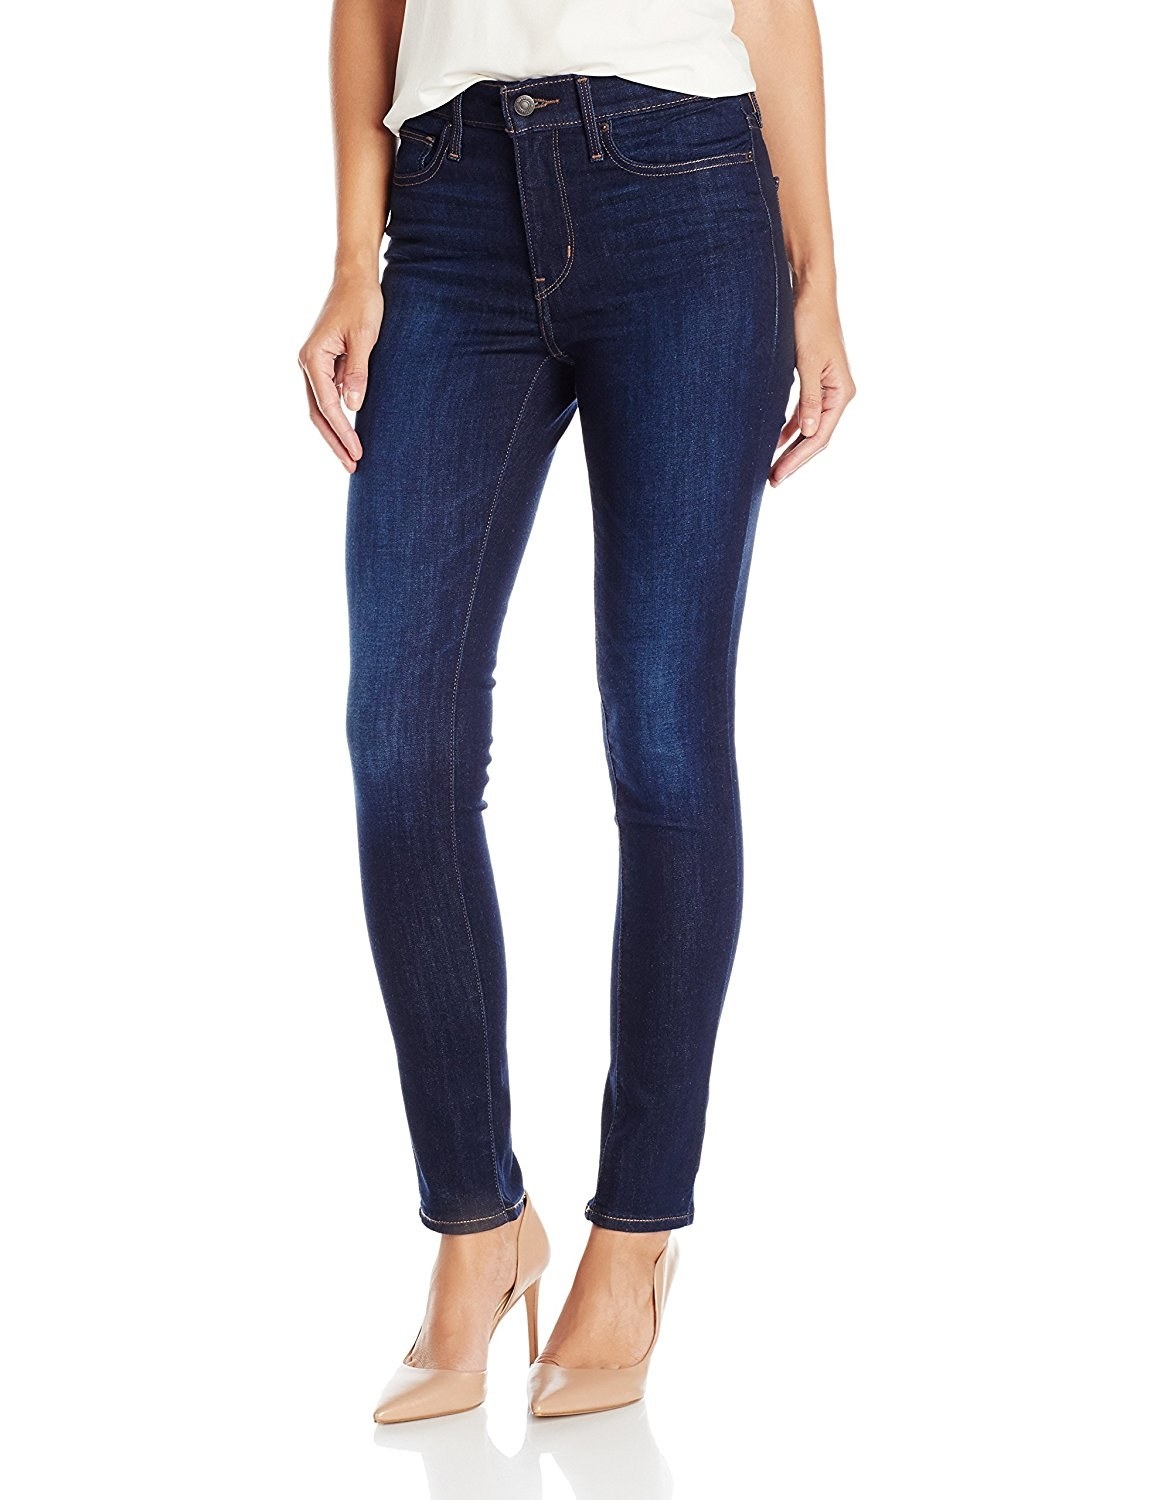 24 Pairs Of Skinny Jeans You'll Basically Never Want To Take Off